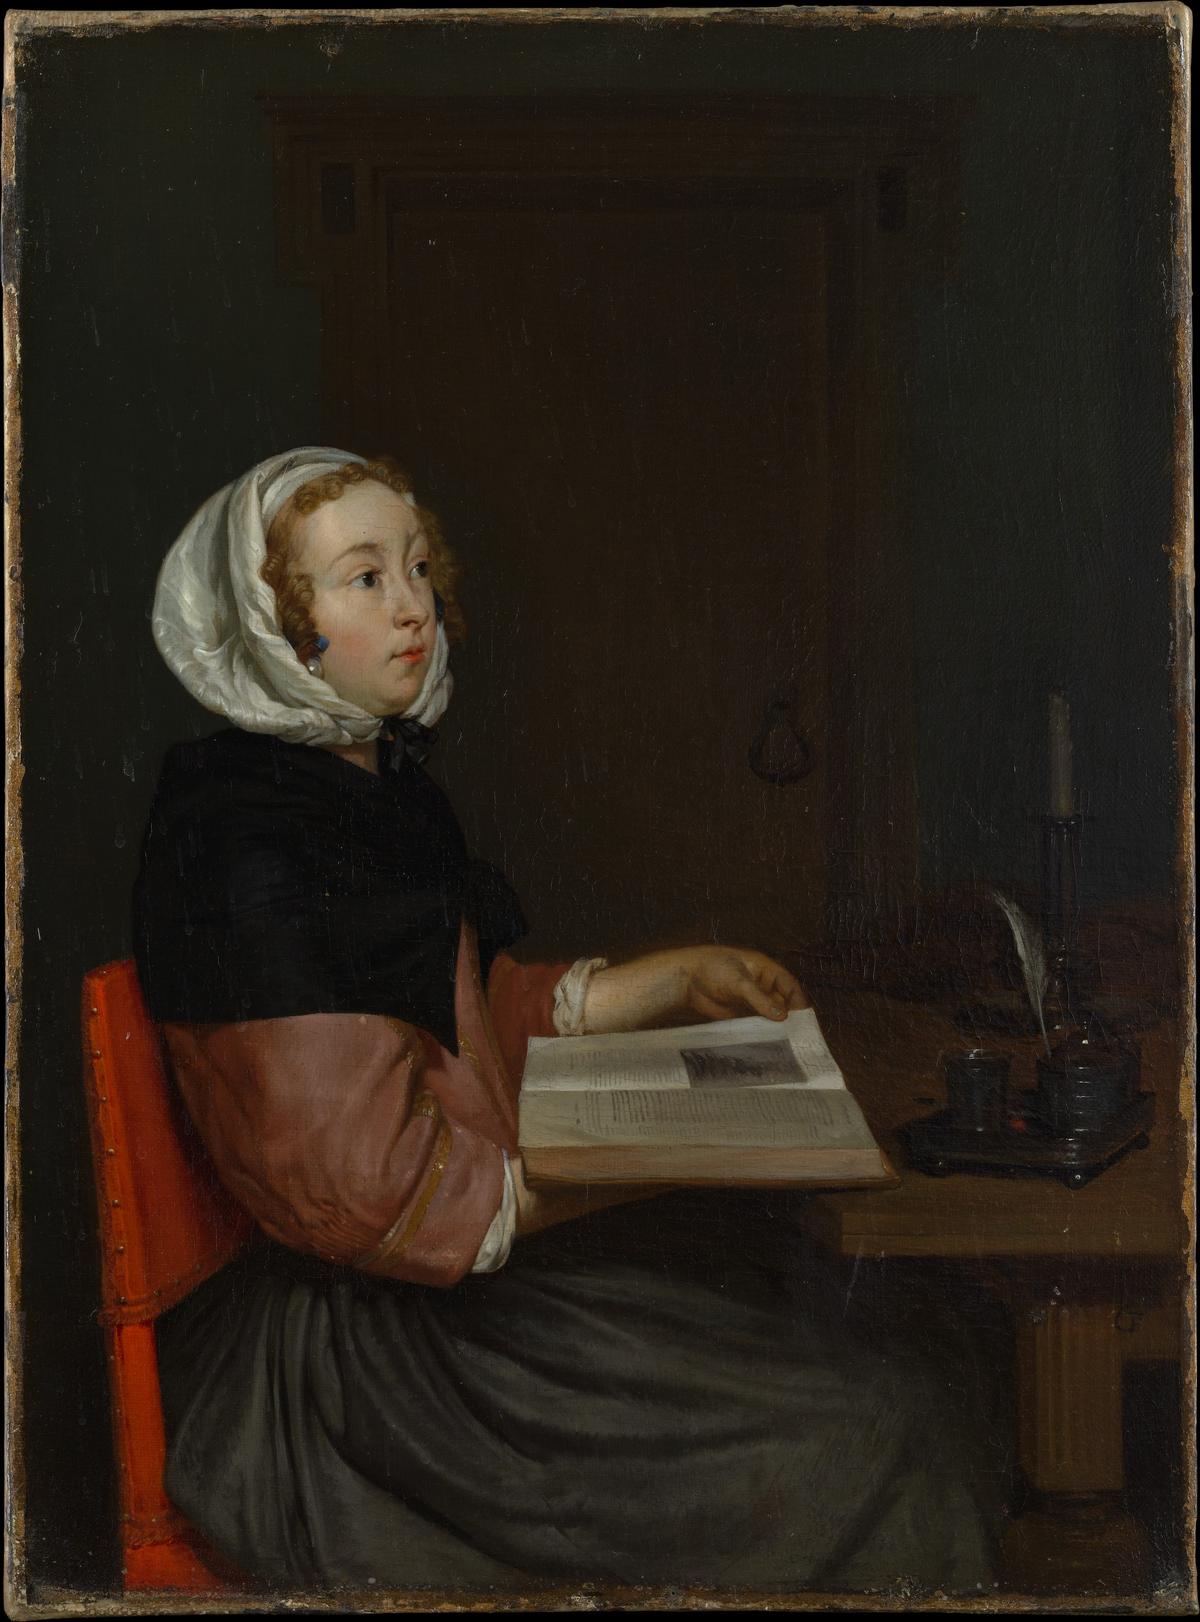 "The Reader" by Eglon van der Neer. Oil on canvas; 15 inches by 11 inches. The Friedsam Collection, Bequest of Michael Friedsam, 1931, Metropolitan Museum of Art, New York. (Public Domain)